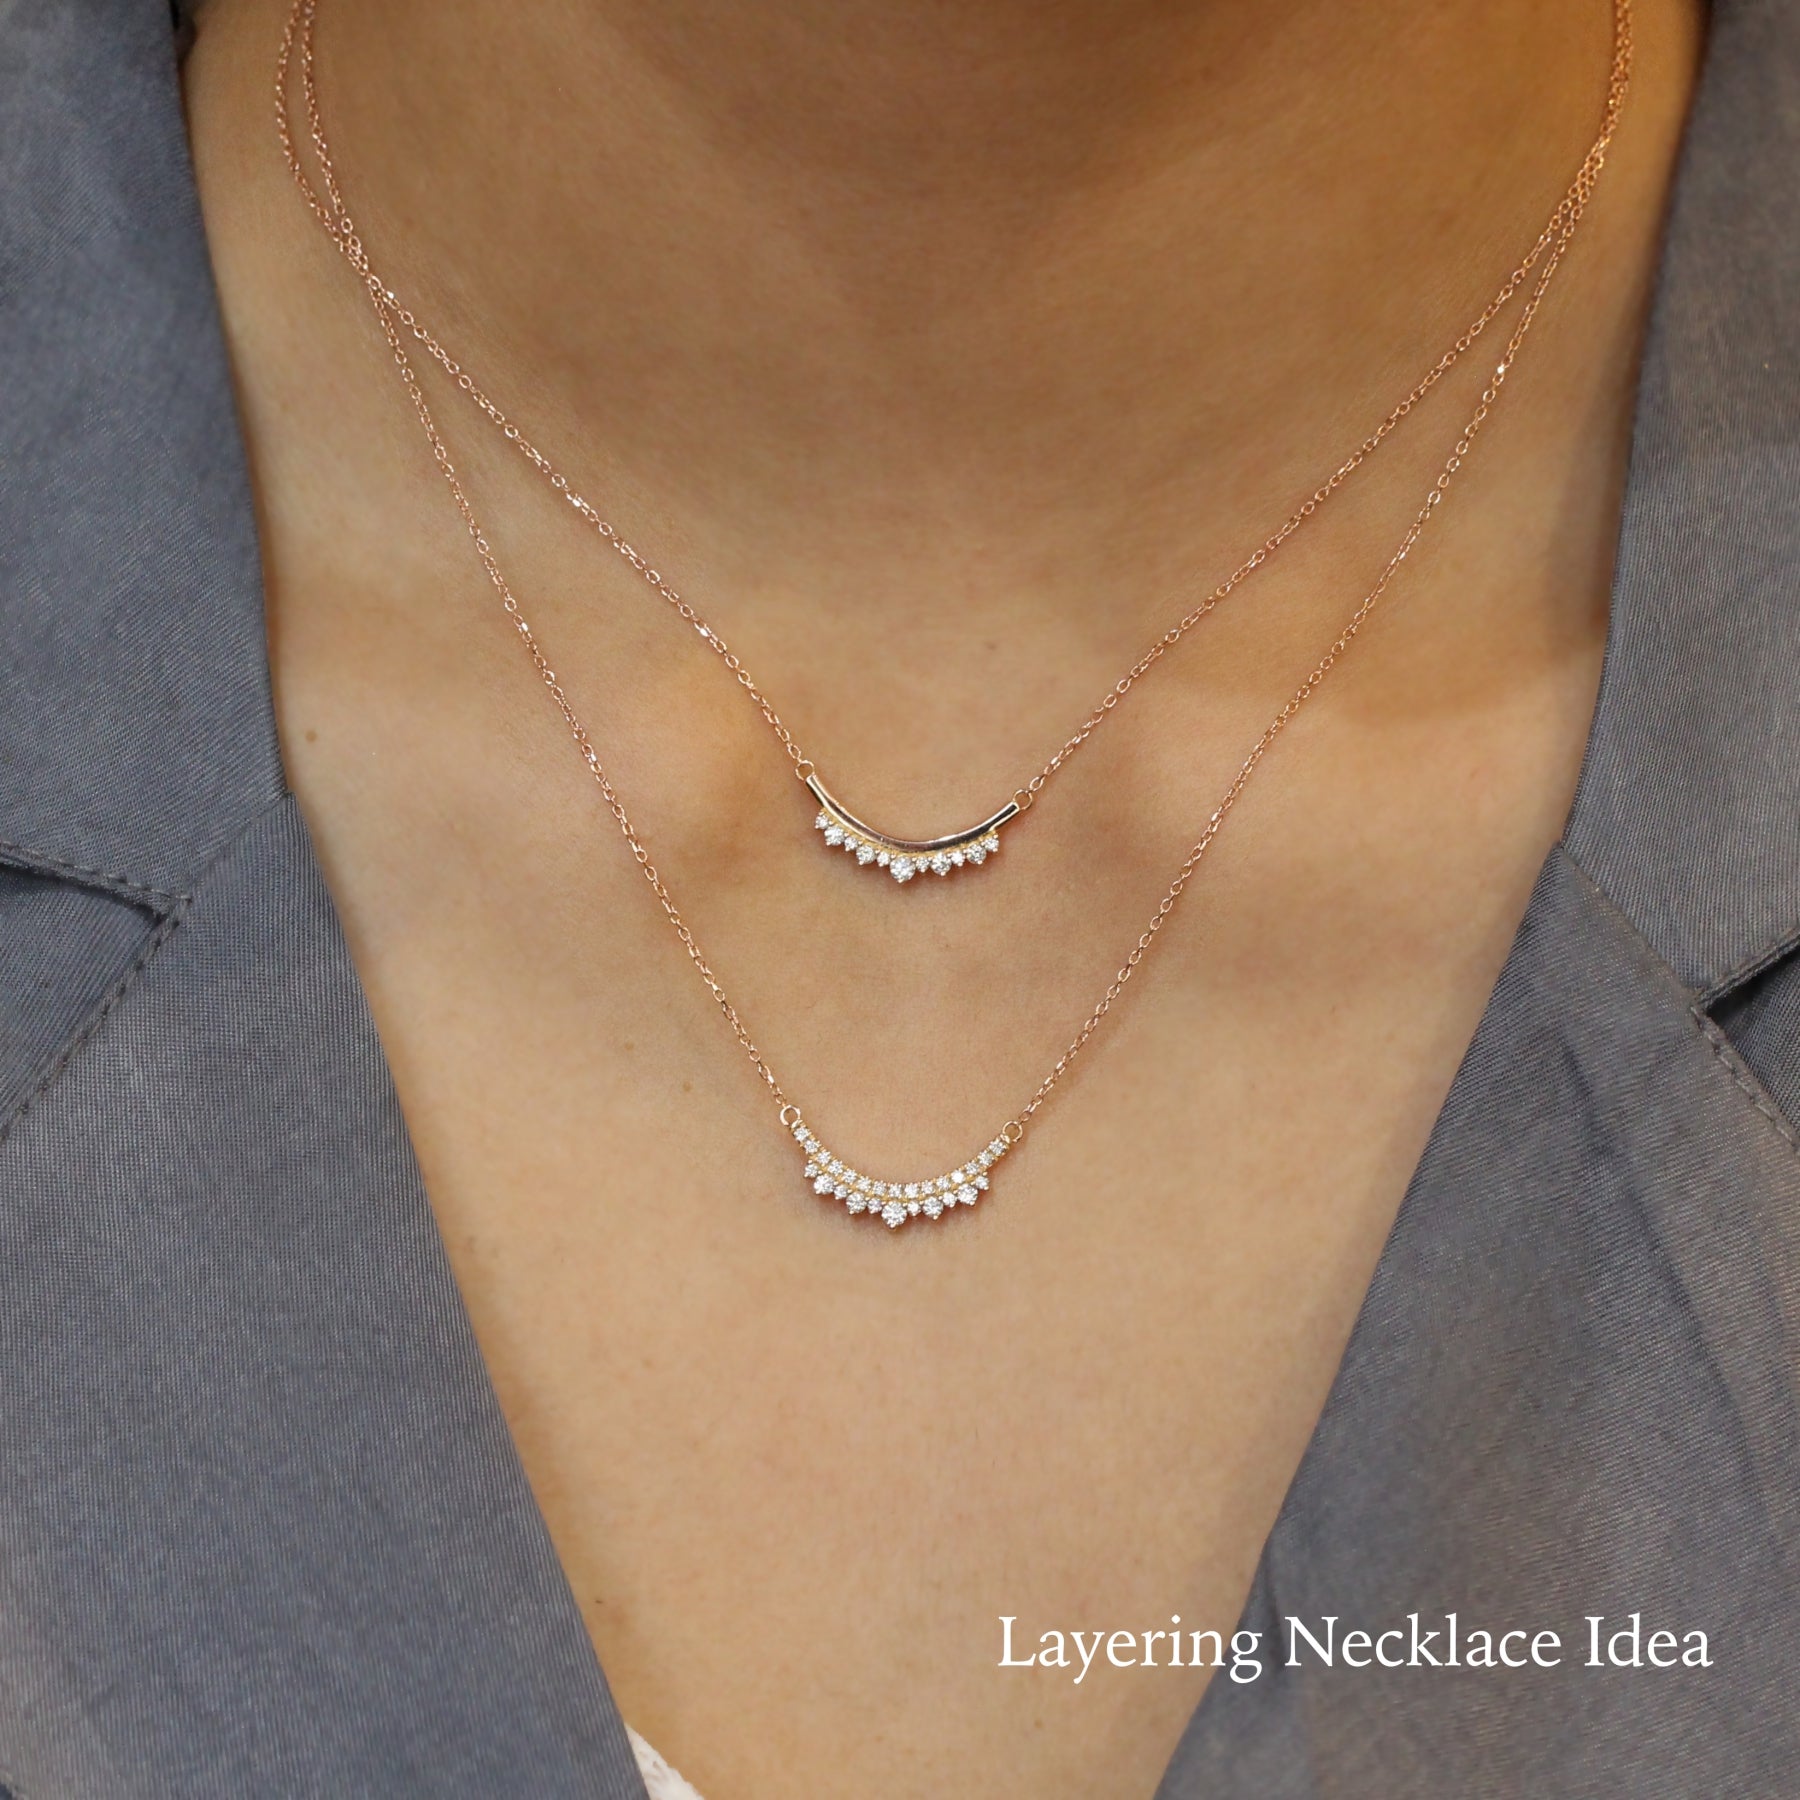 Layering necklaces, layered necklaces La More Design Jewelry